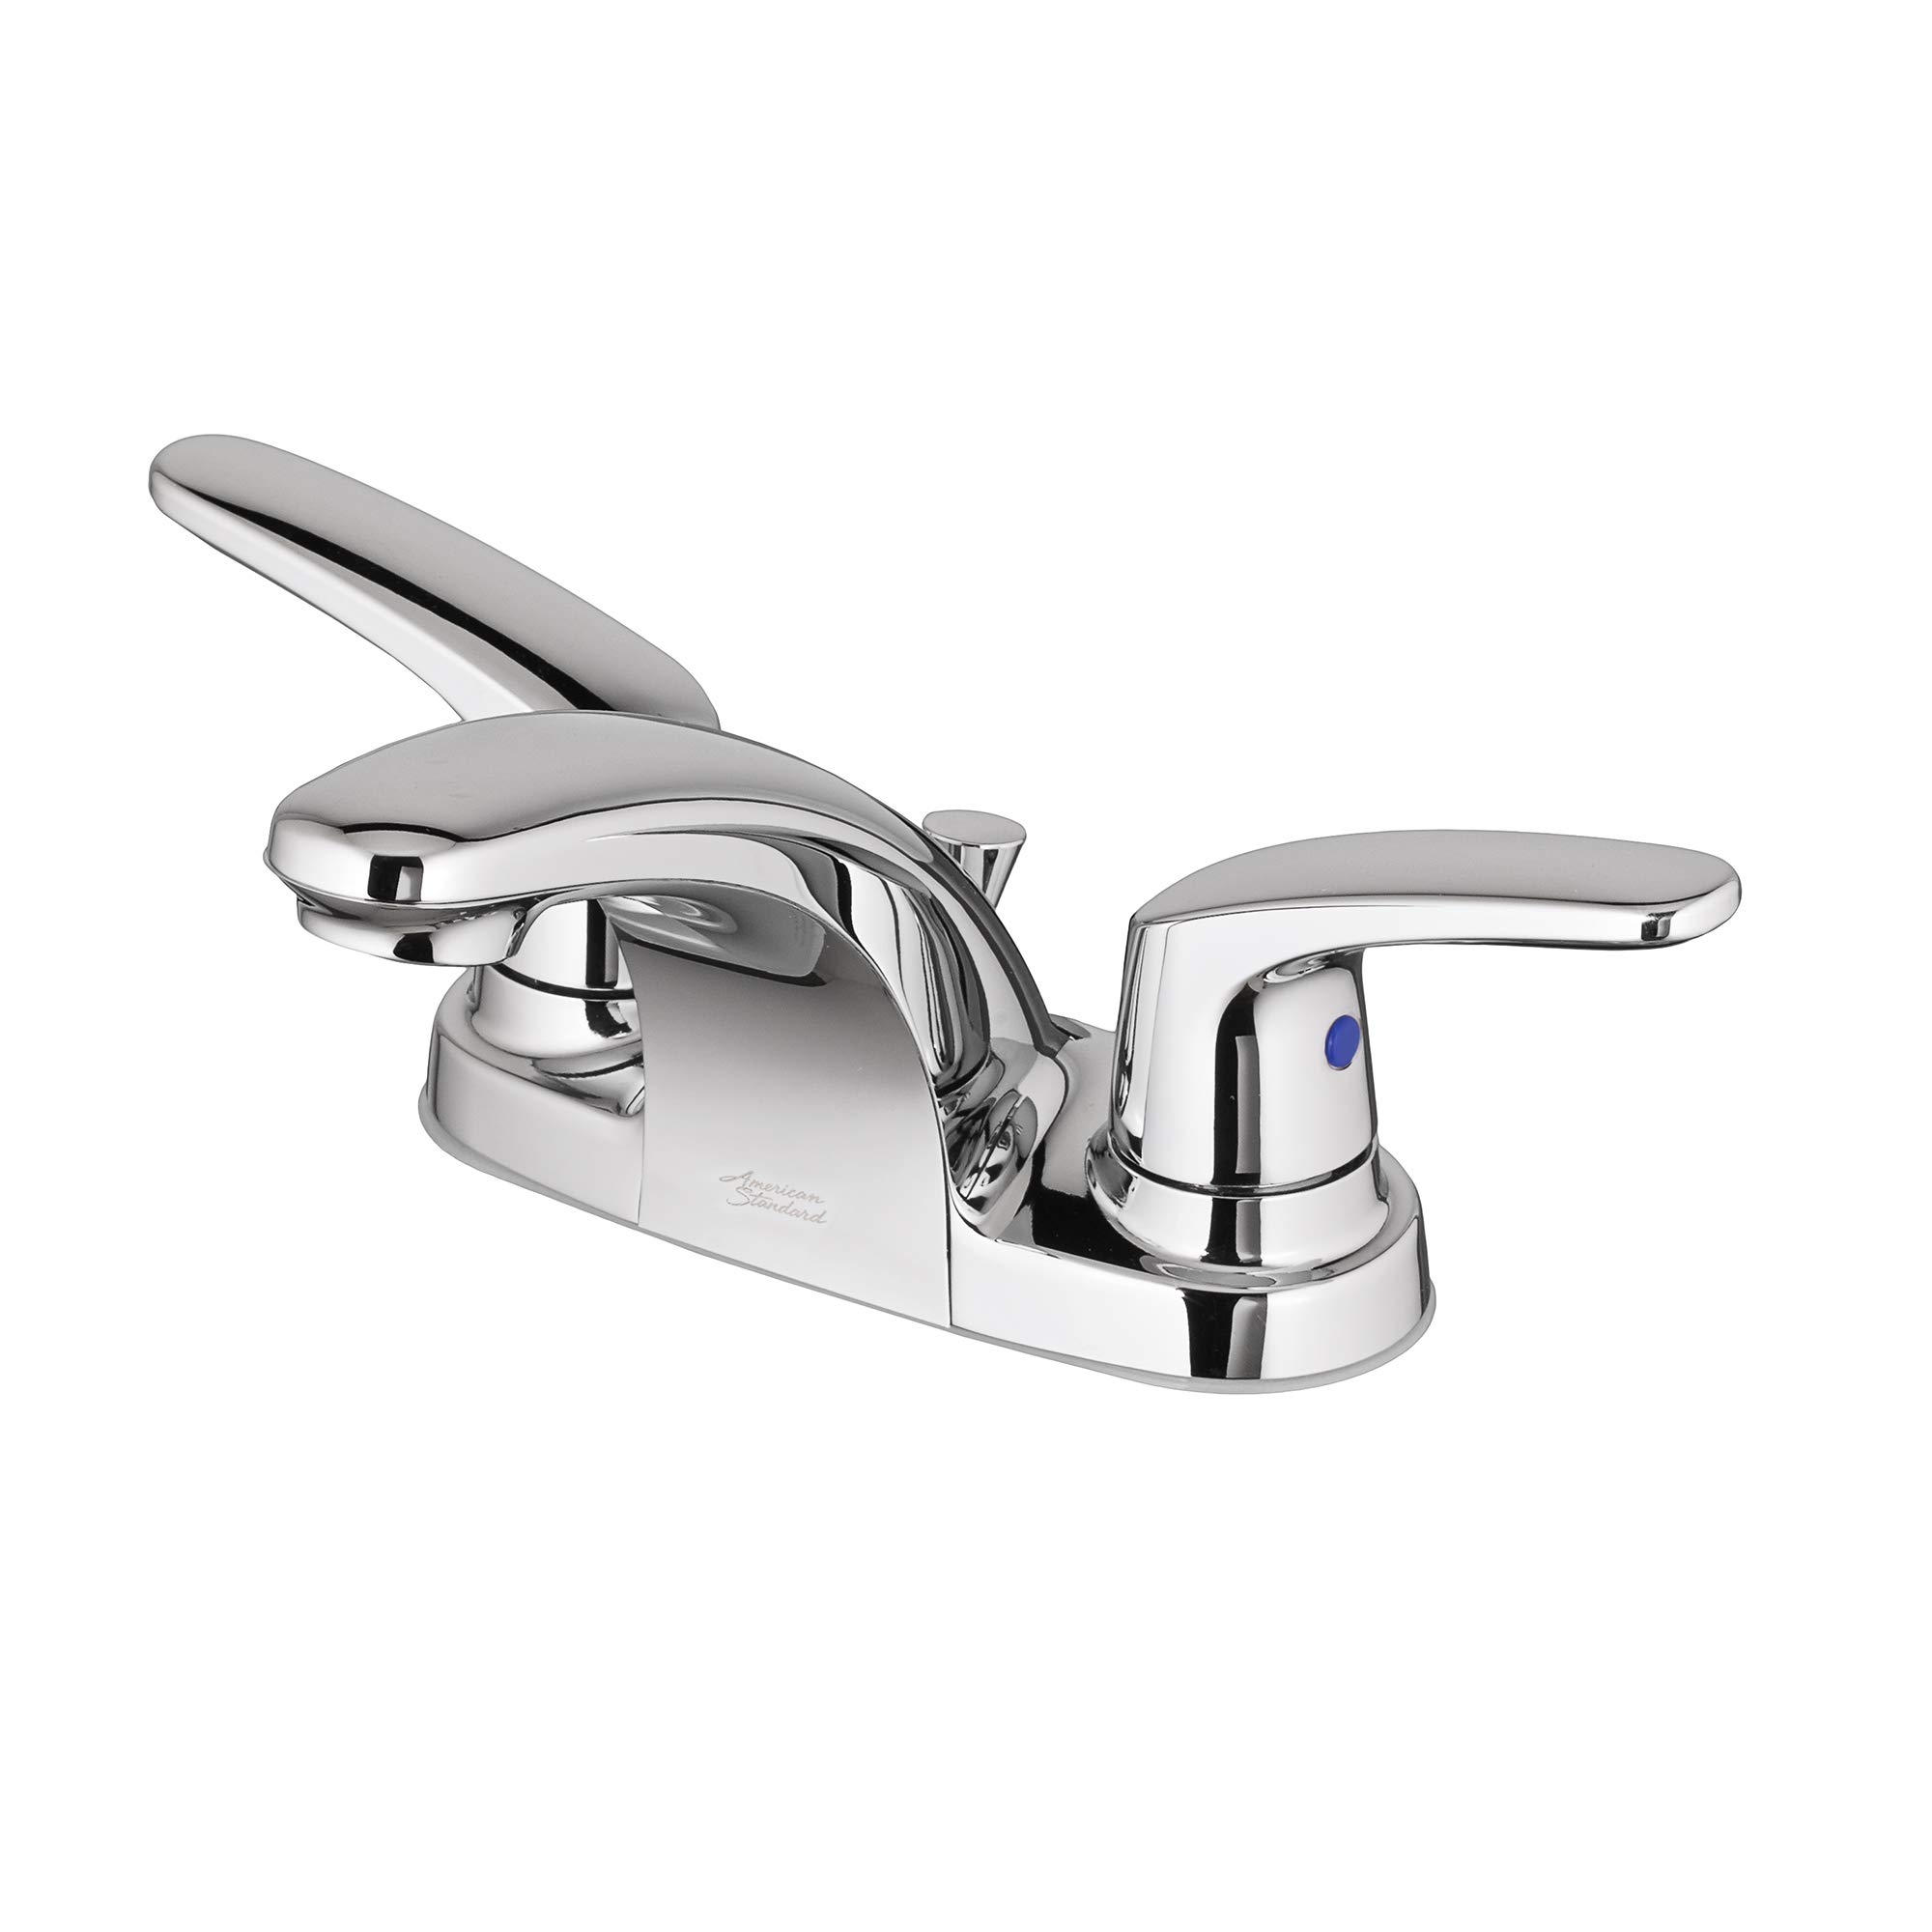 American Standard 7075200.002 Colony Pro Two-Handle Centerset Bathroom Faucet, 1.2 GPM, Polished Chrome